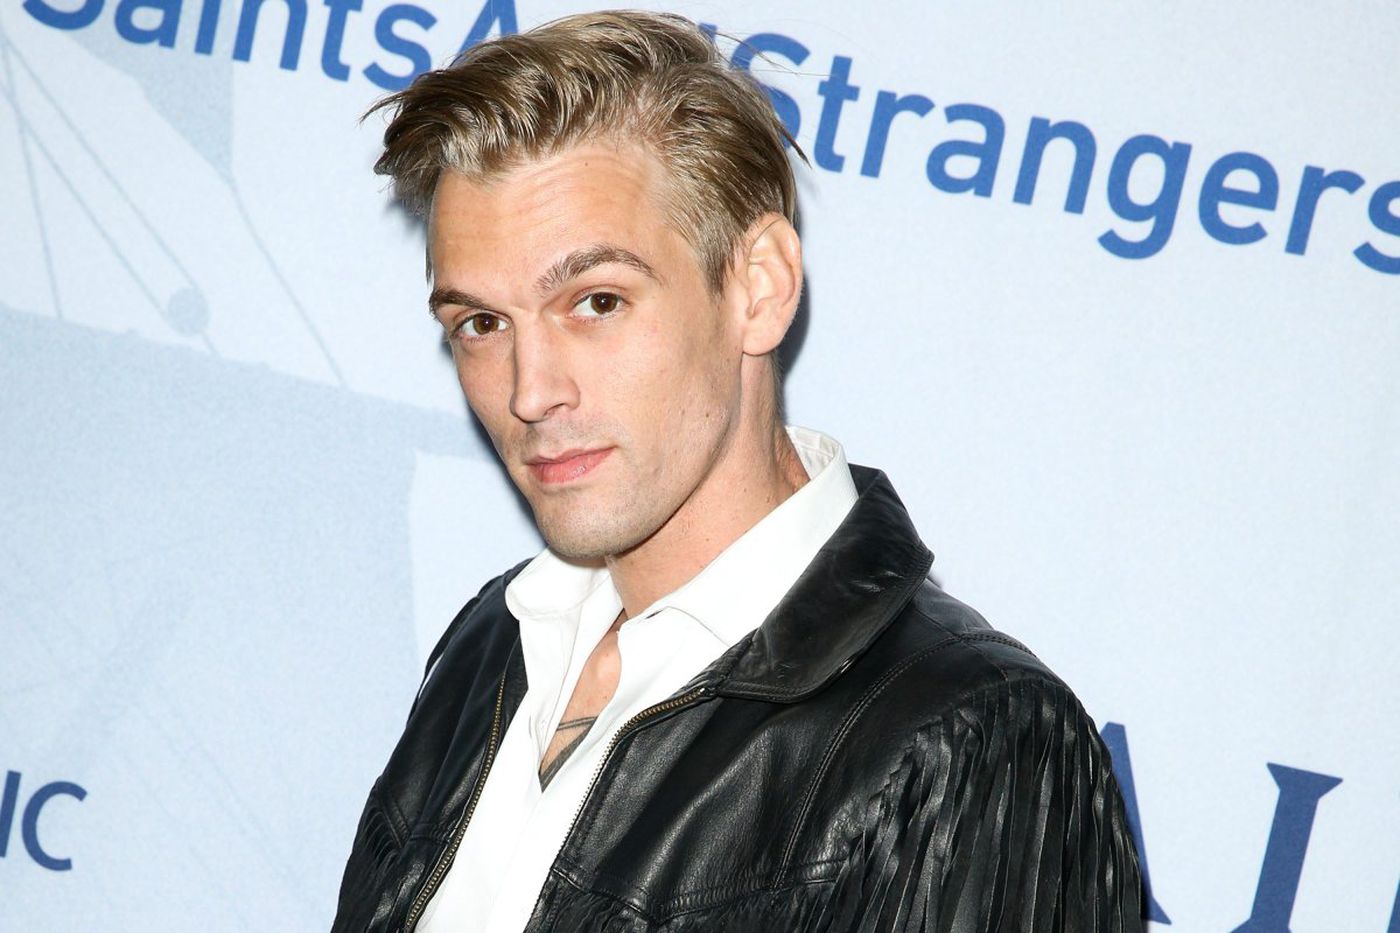 Aaron Carter Was Found Dead in His Home.